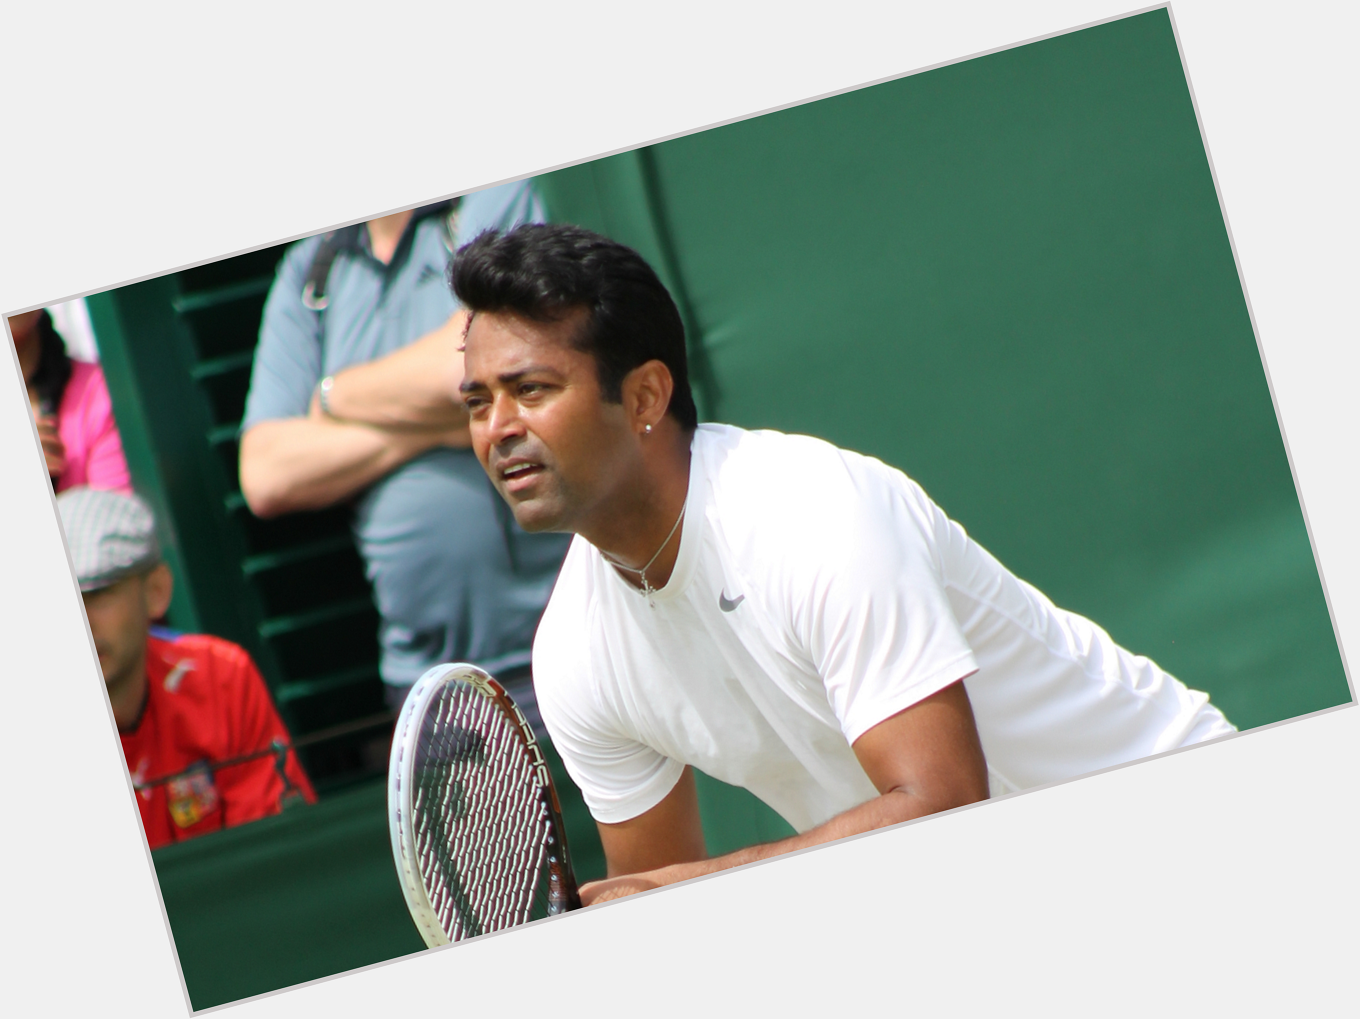 A very happy birthday to Leander Adrian Paes. 